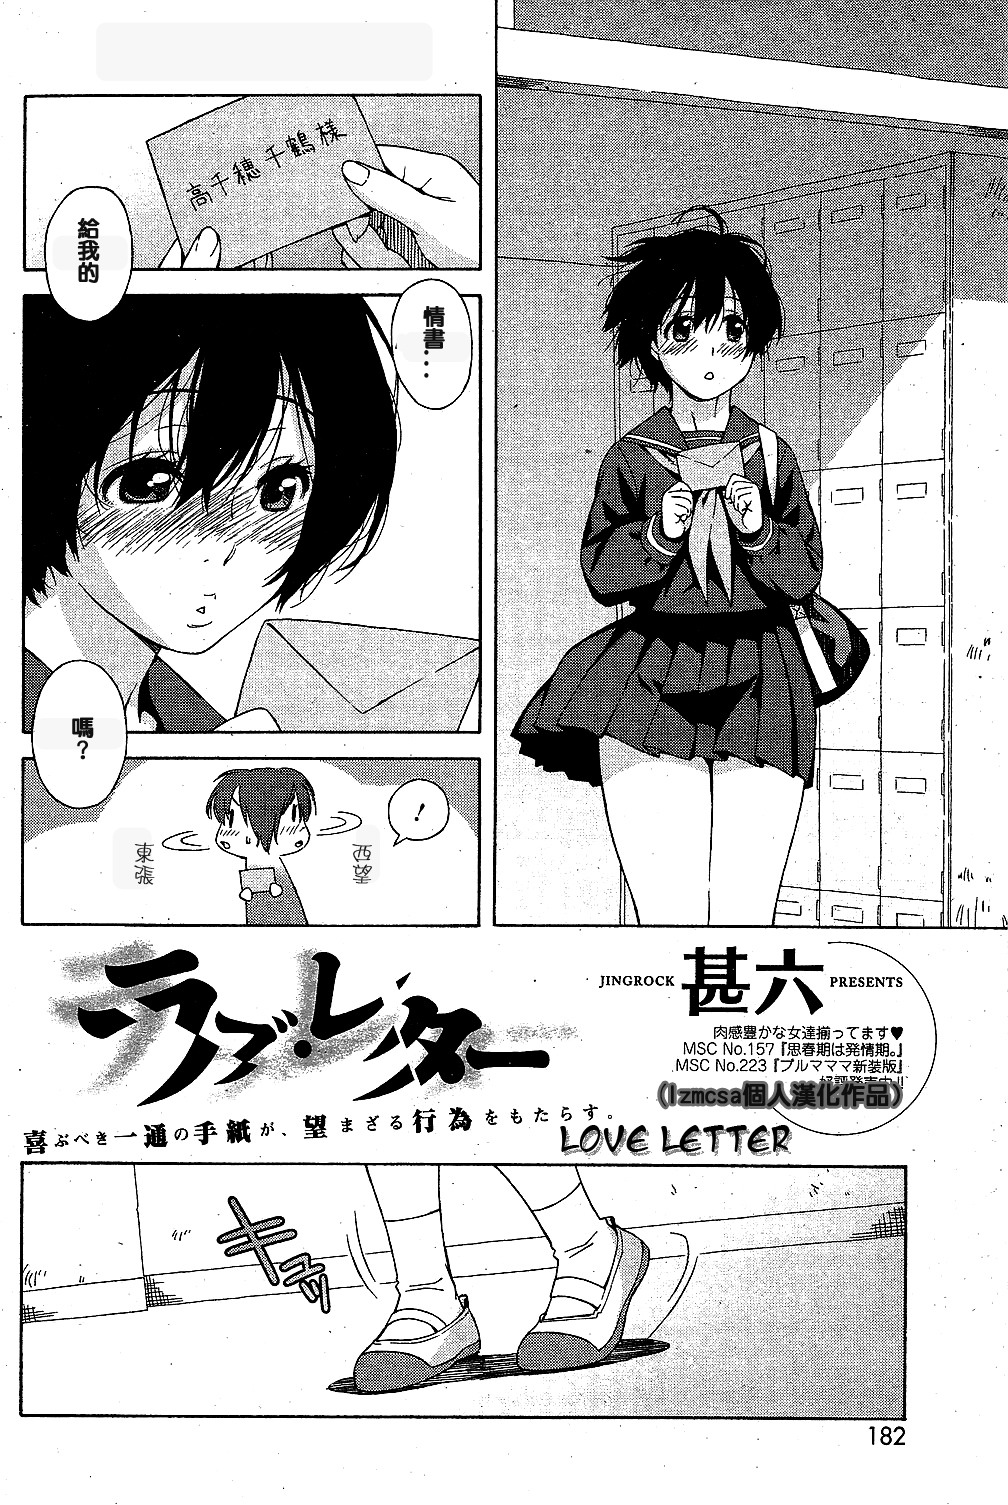 [Jingrock] Love Letter Ch. 1-2 [CHINESE] [甚六] ラブ・レター 章 1-2 [中文]